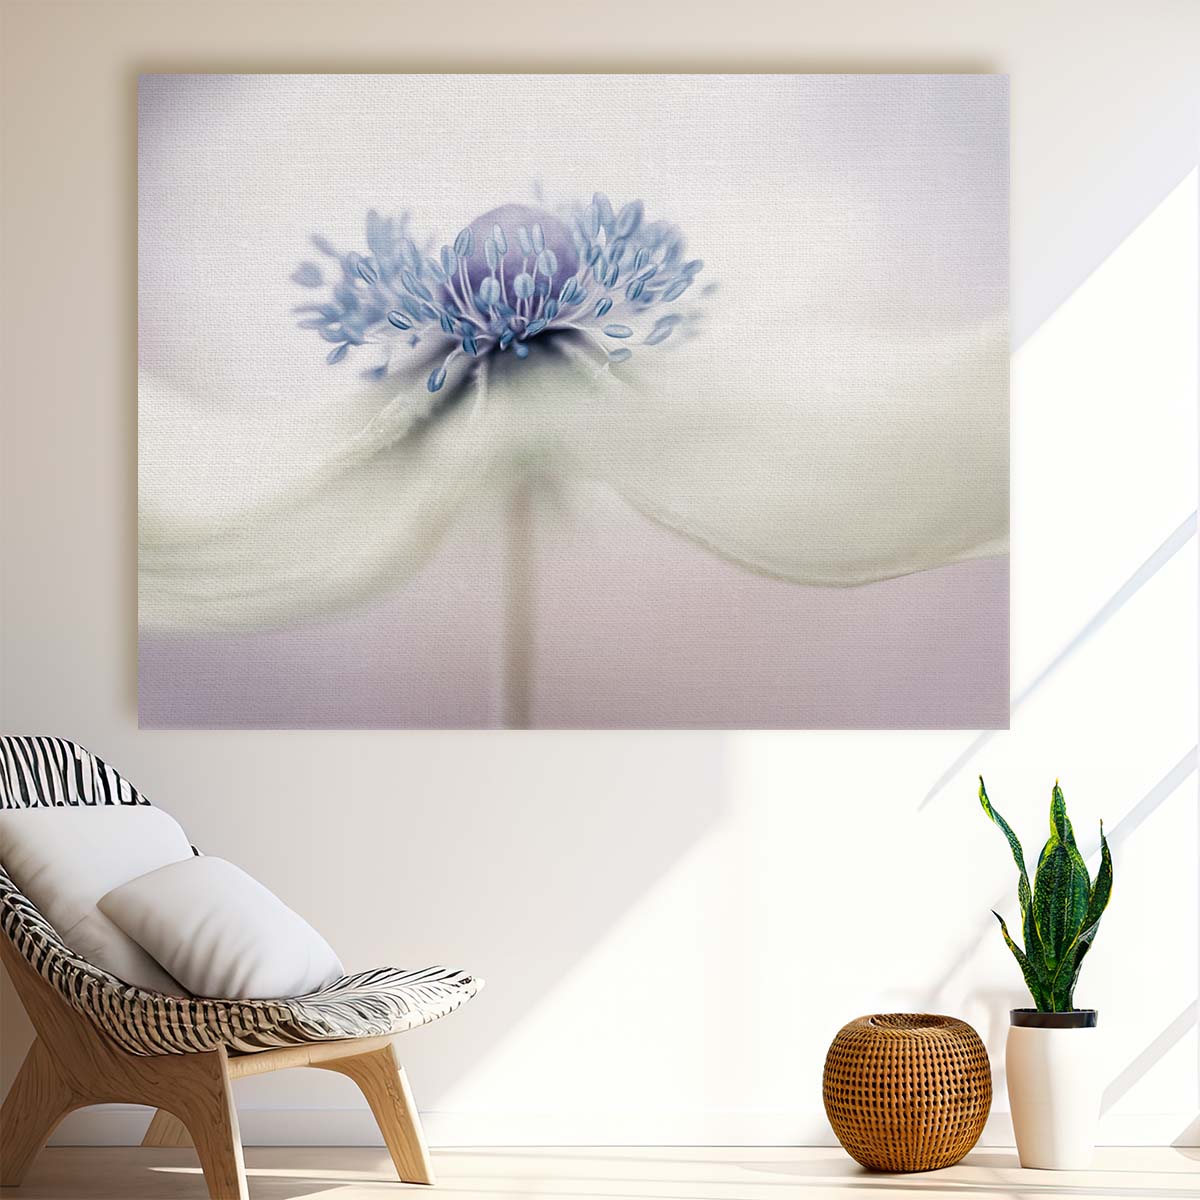 Japanese Anemone Macro Floral Bokeh Wall Art by Luxuriance Designs. Made in USA.